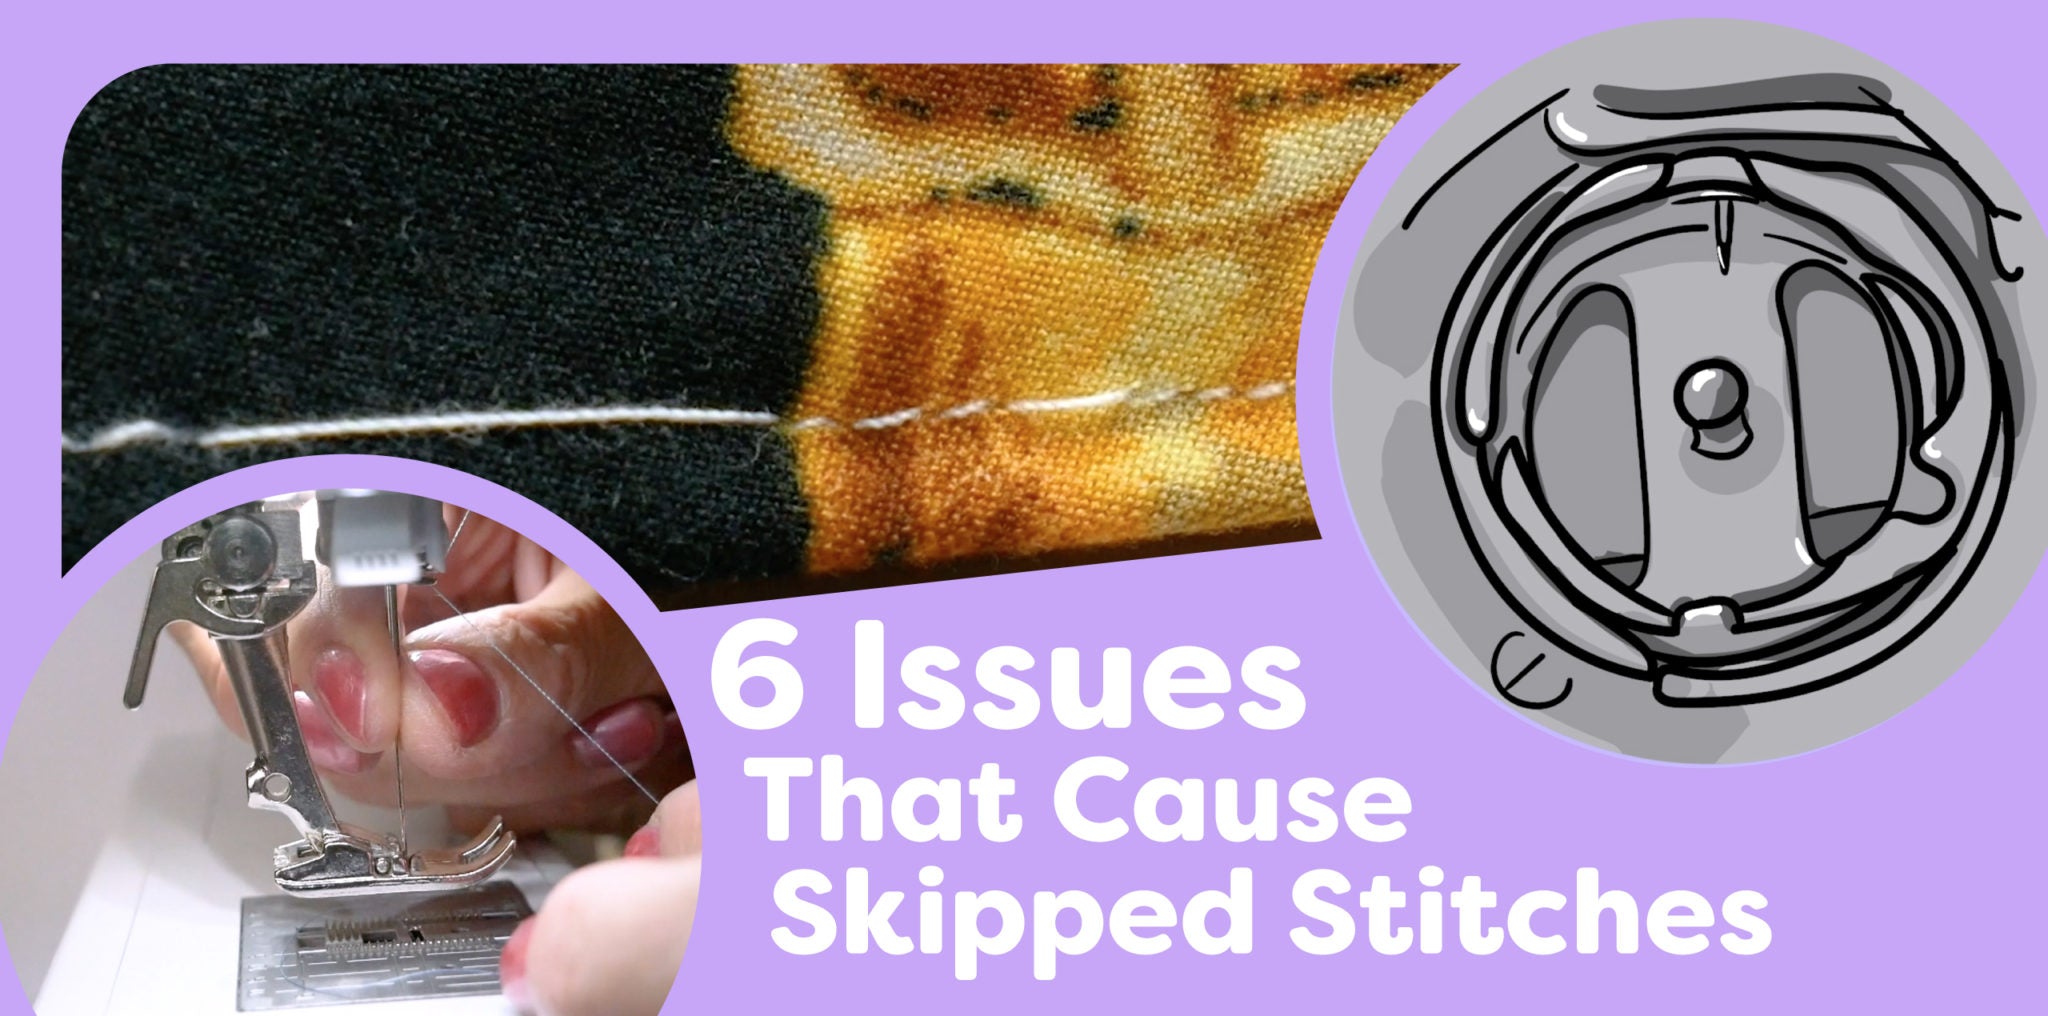 Hussein Bourot 6 Issues That Cause Skipped Stitches - WonderFil Europe ...